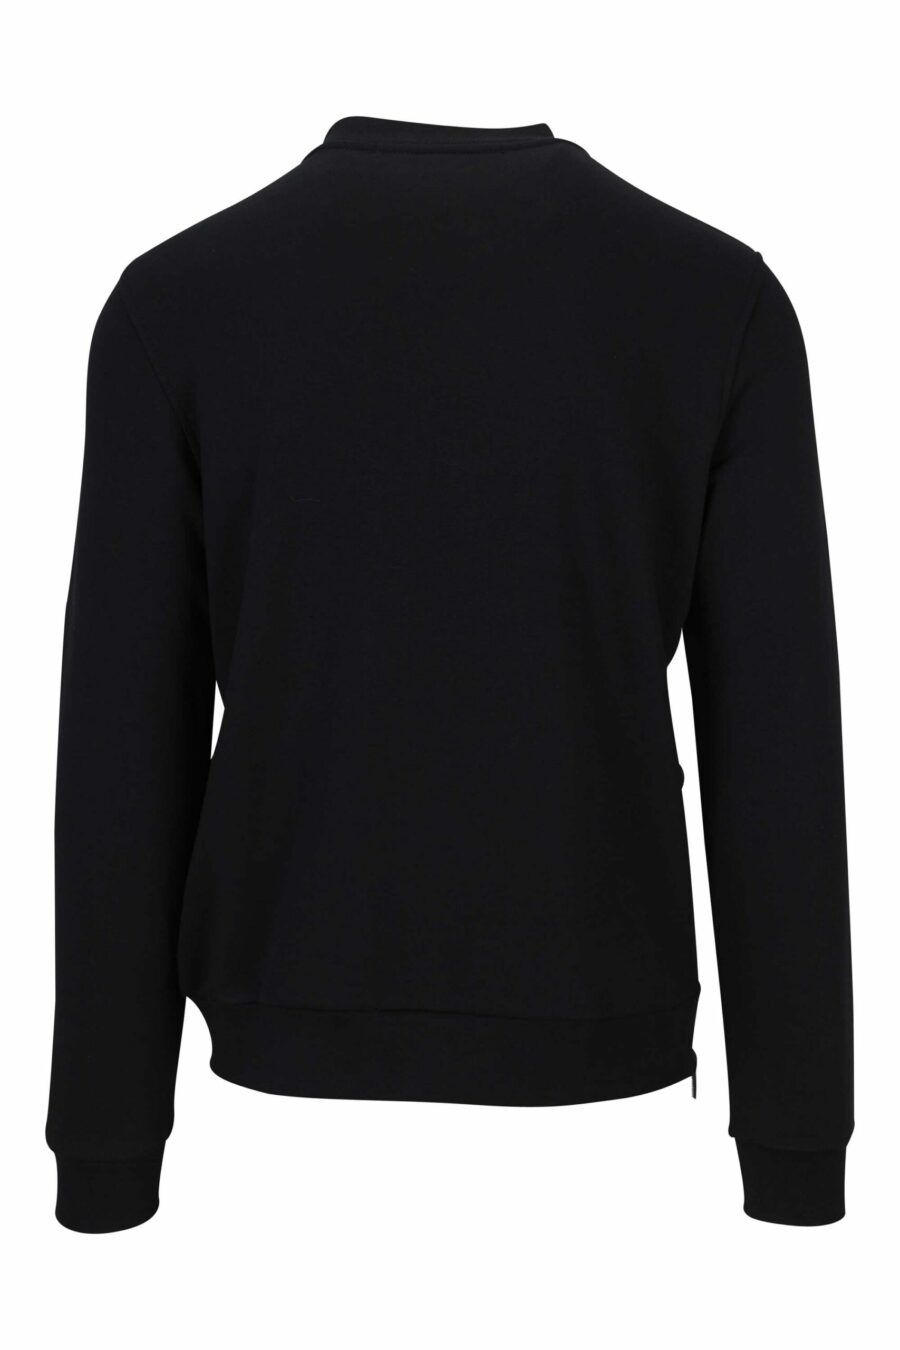 Black sweatshirt with embroidered minilogue - 4062226652995 1 1 scaled